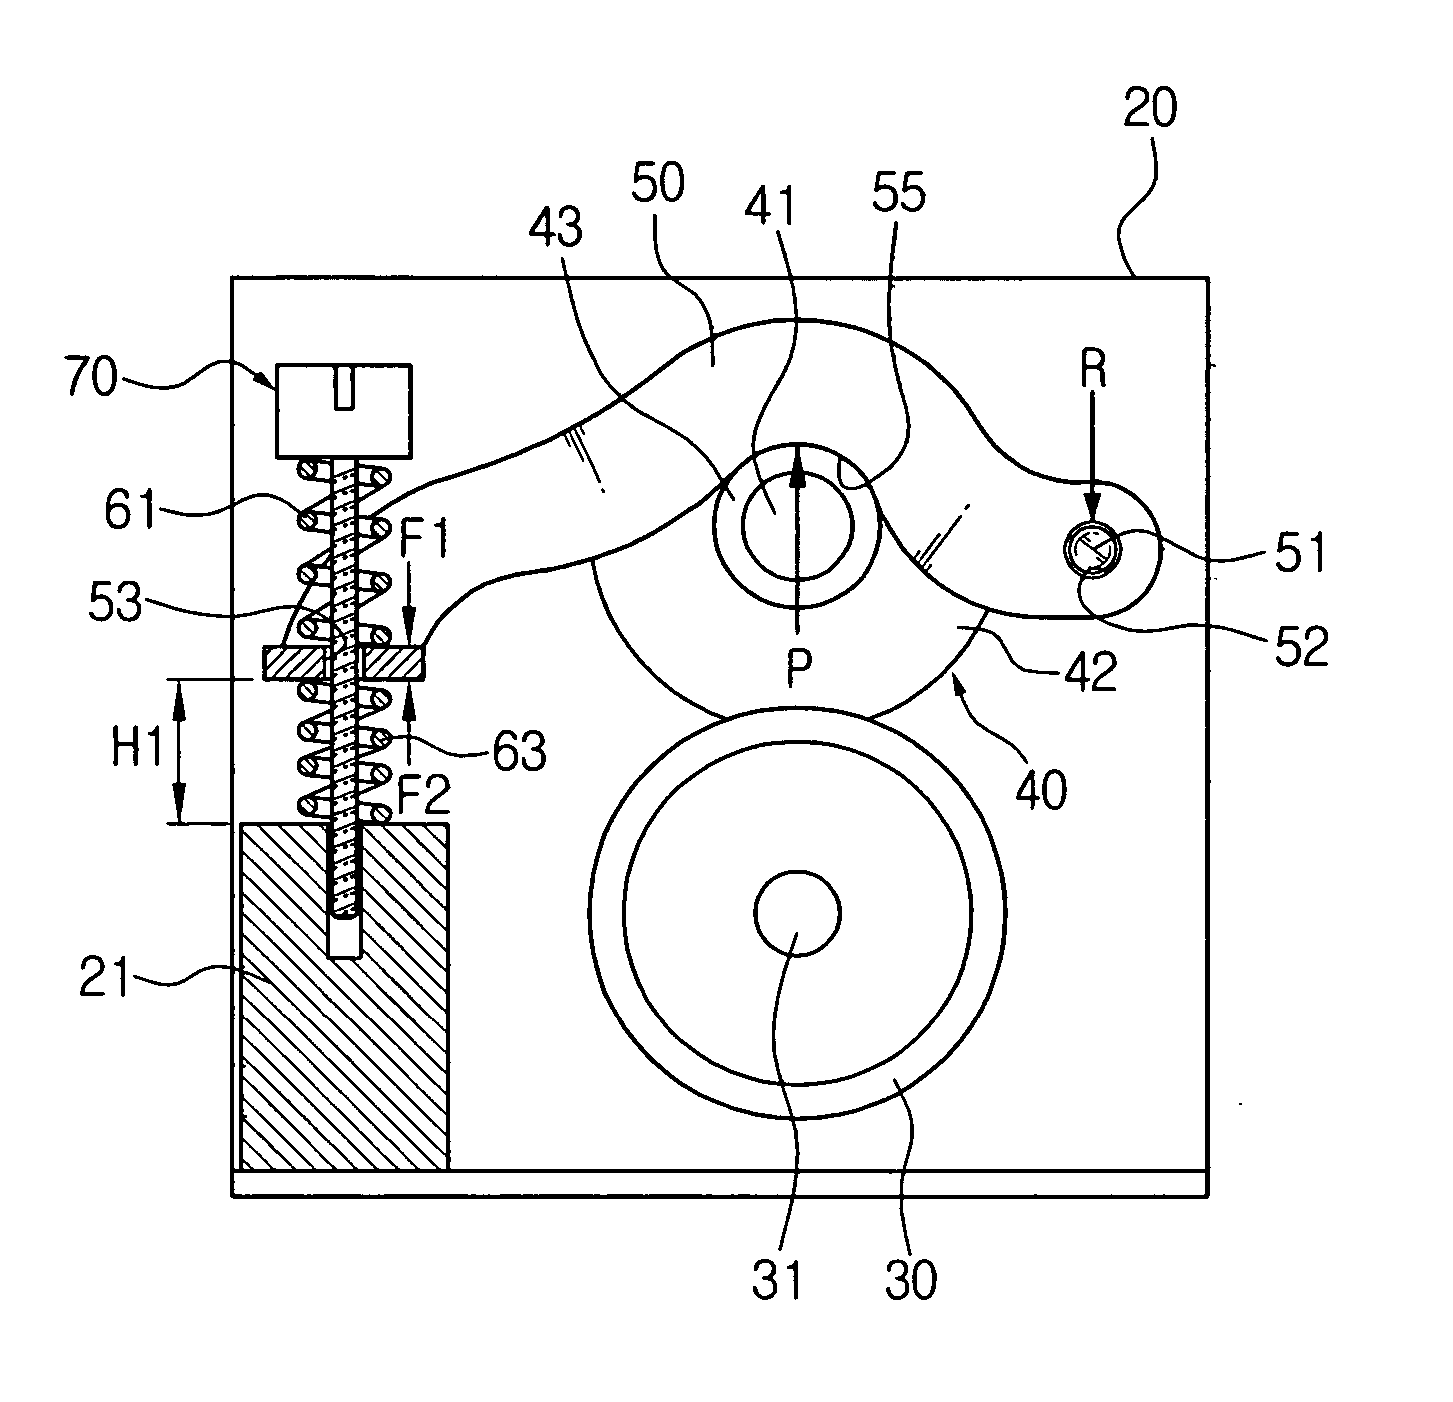 Fusing apparatus for an image forming apparatus and a method thereof